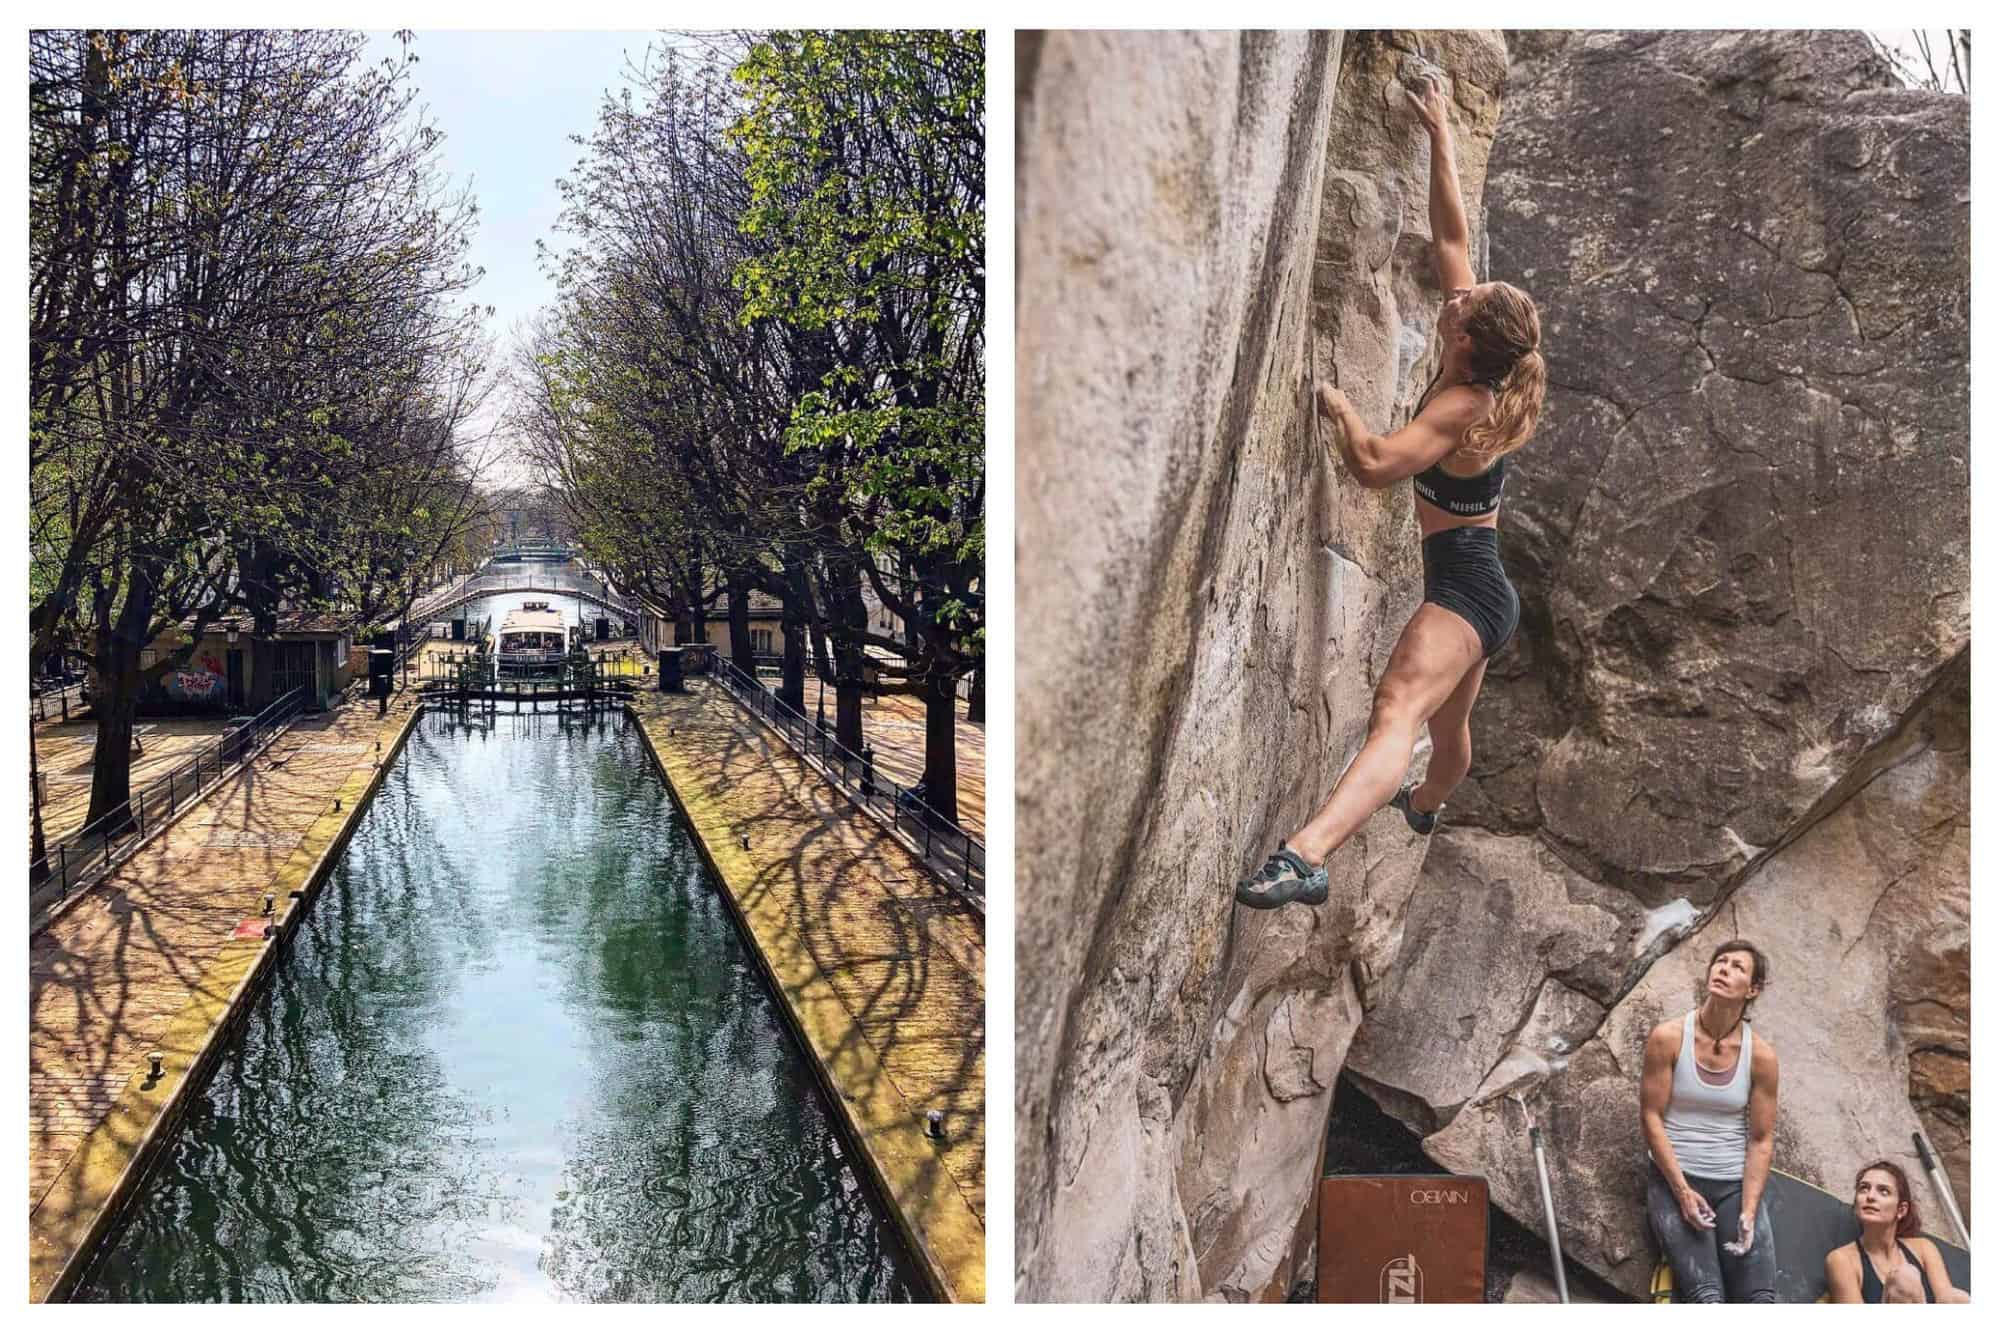 The sky is reflected in the emerald green waters of Canal Saint-Martin. Young Dutch climber Tiba Vroom reachs for a hold on a boulder in Fontainebleau.